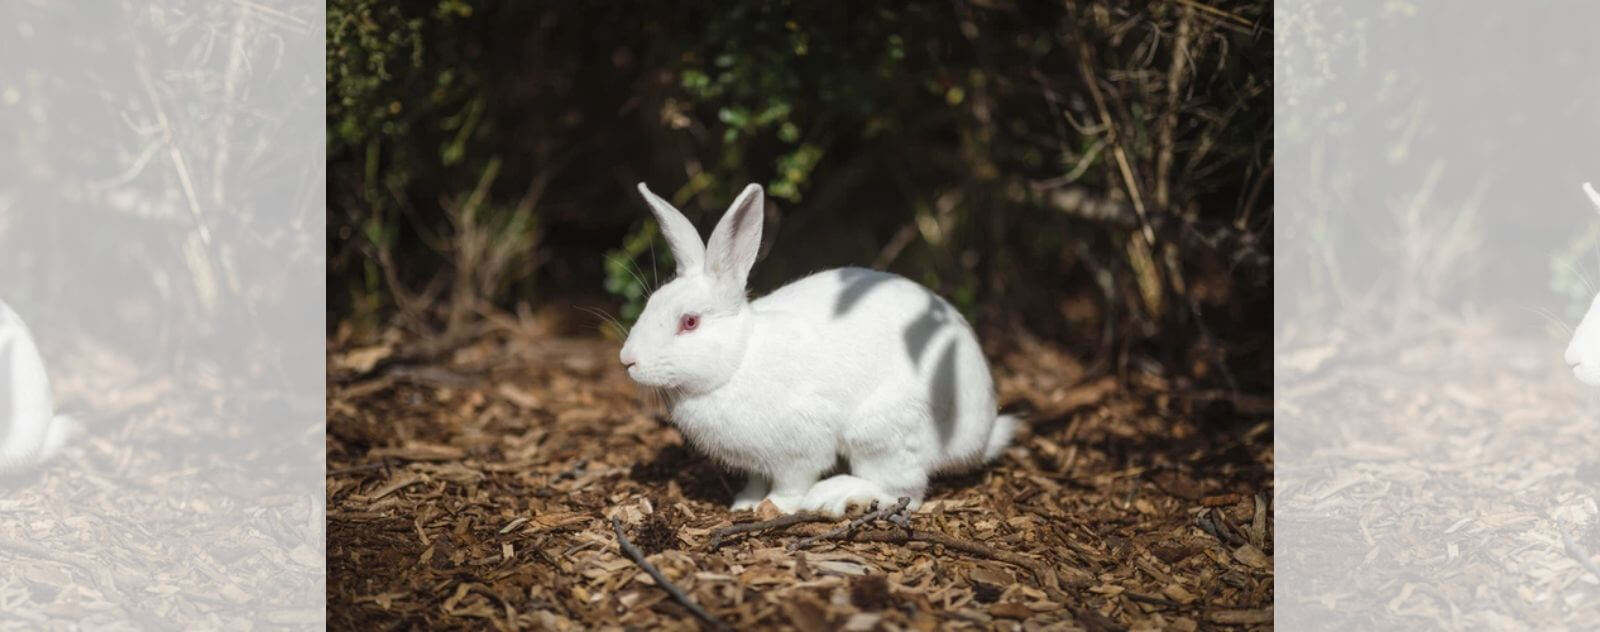 White Rabbit in a Forest and in its Natural Lagomorph Habitat